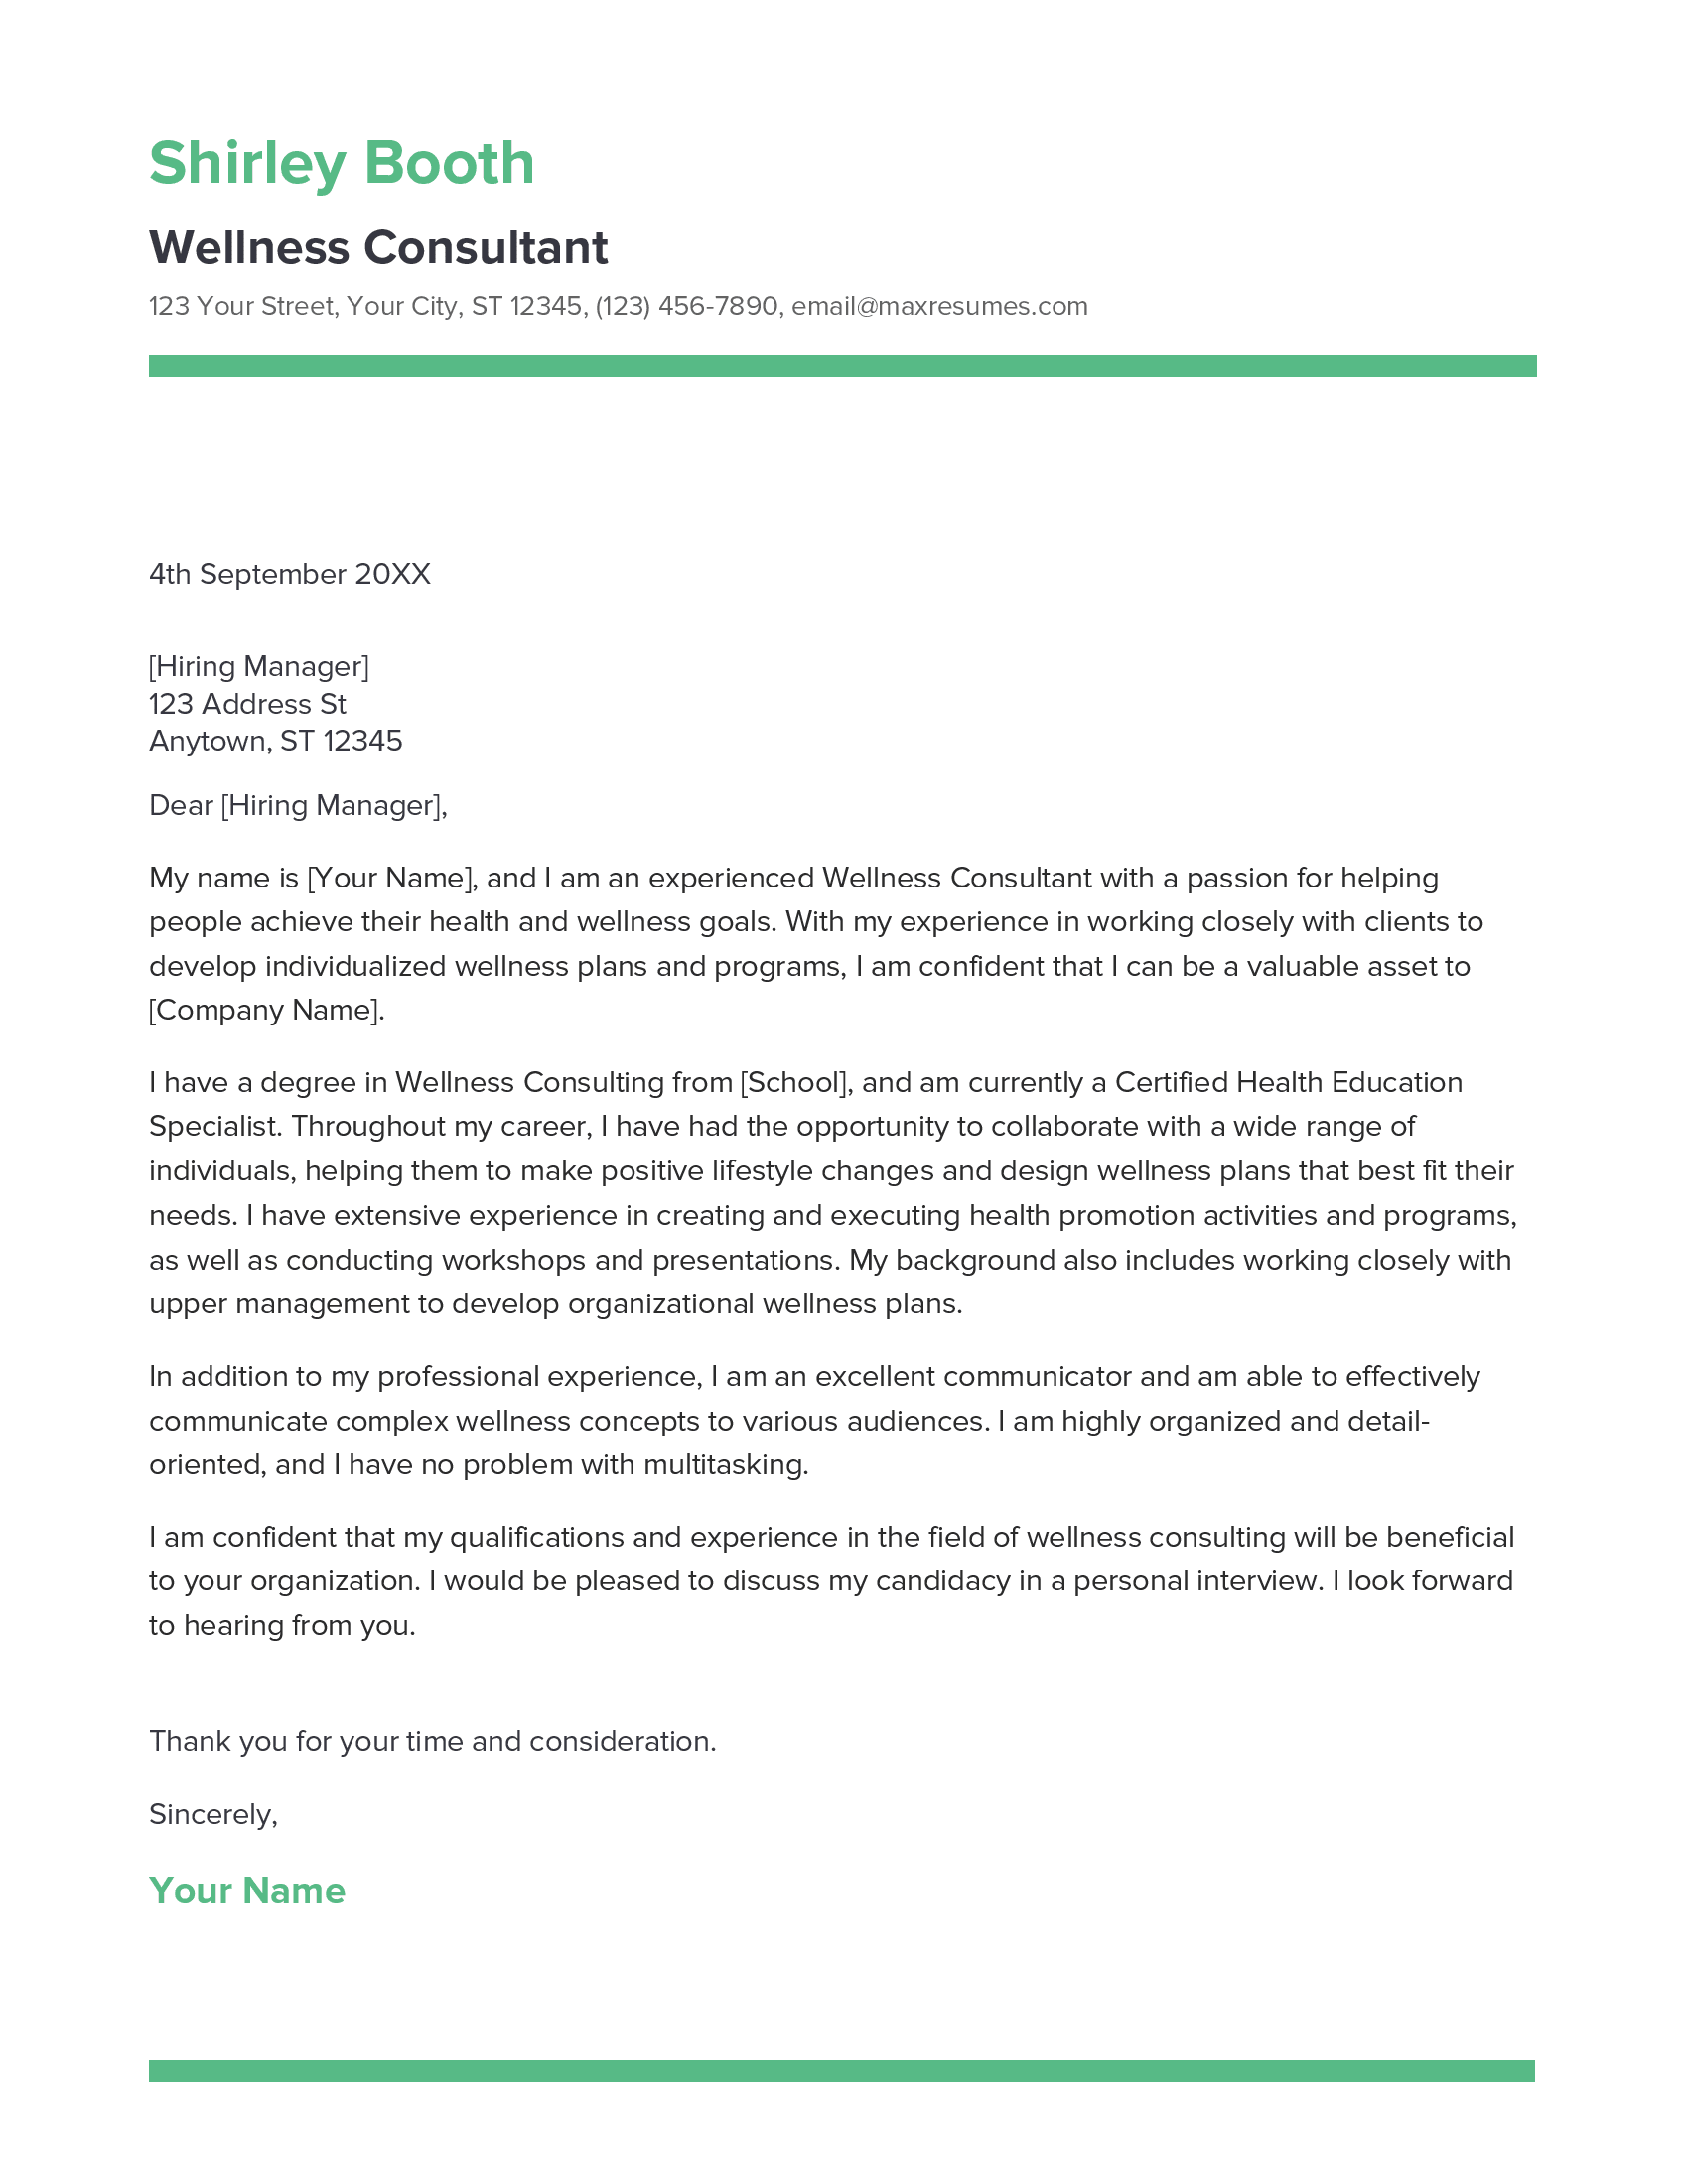 Wellness Consultant Cover Letter Example